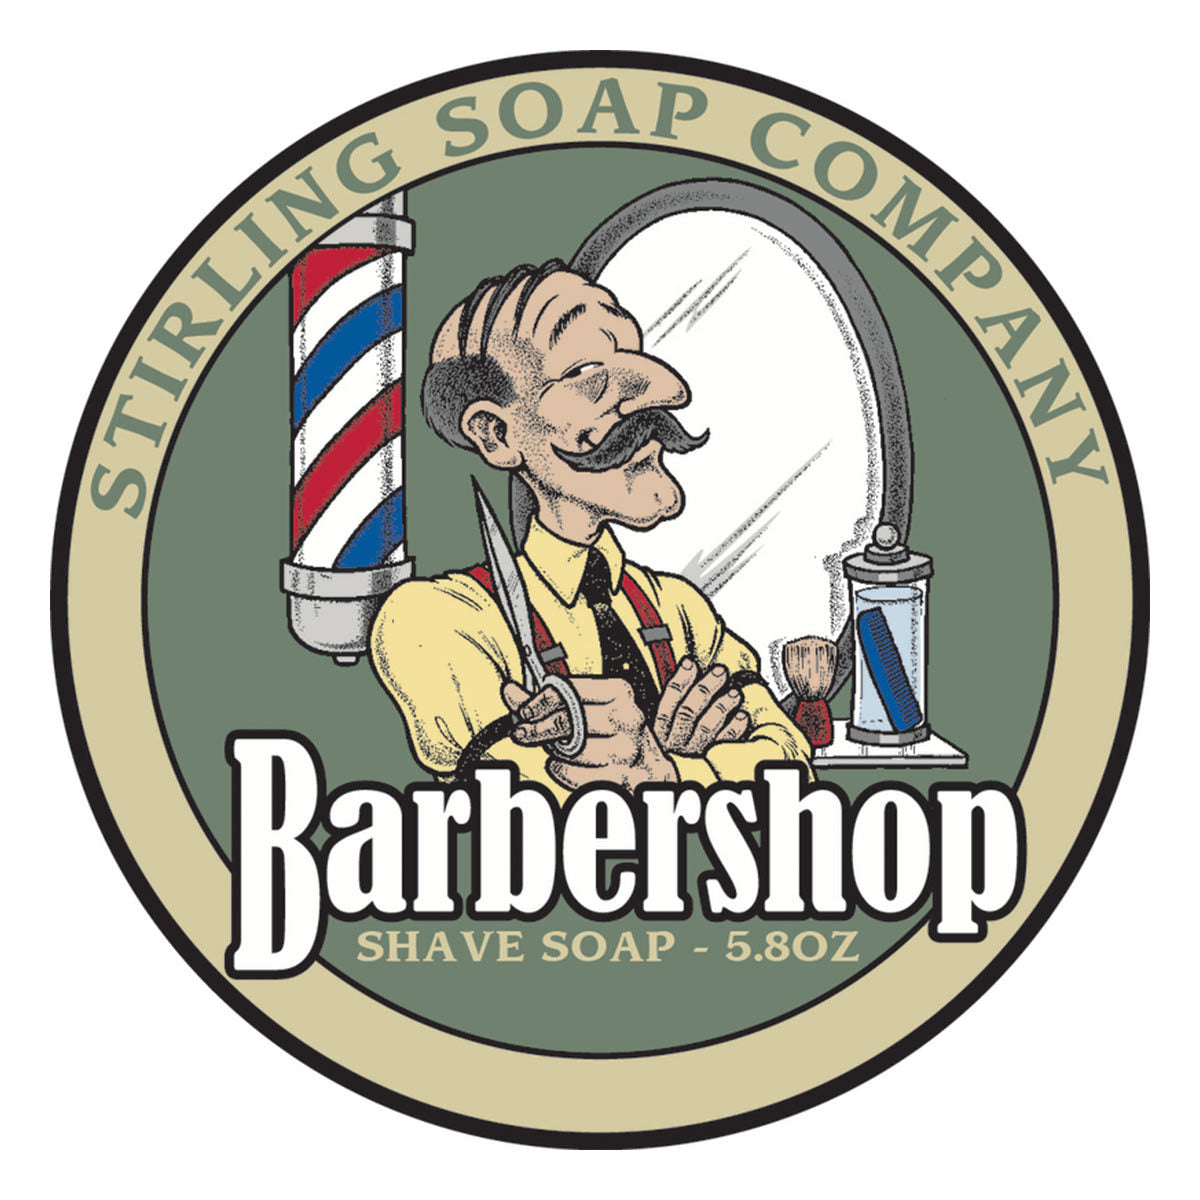 Primary image of Barbershop Shave Soap